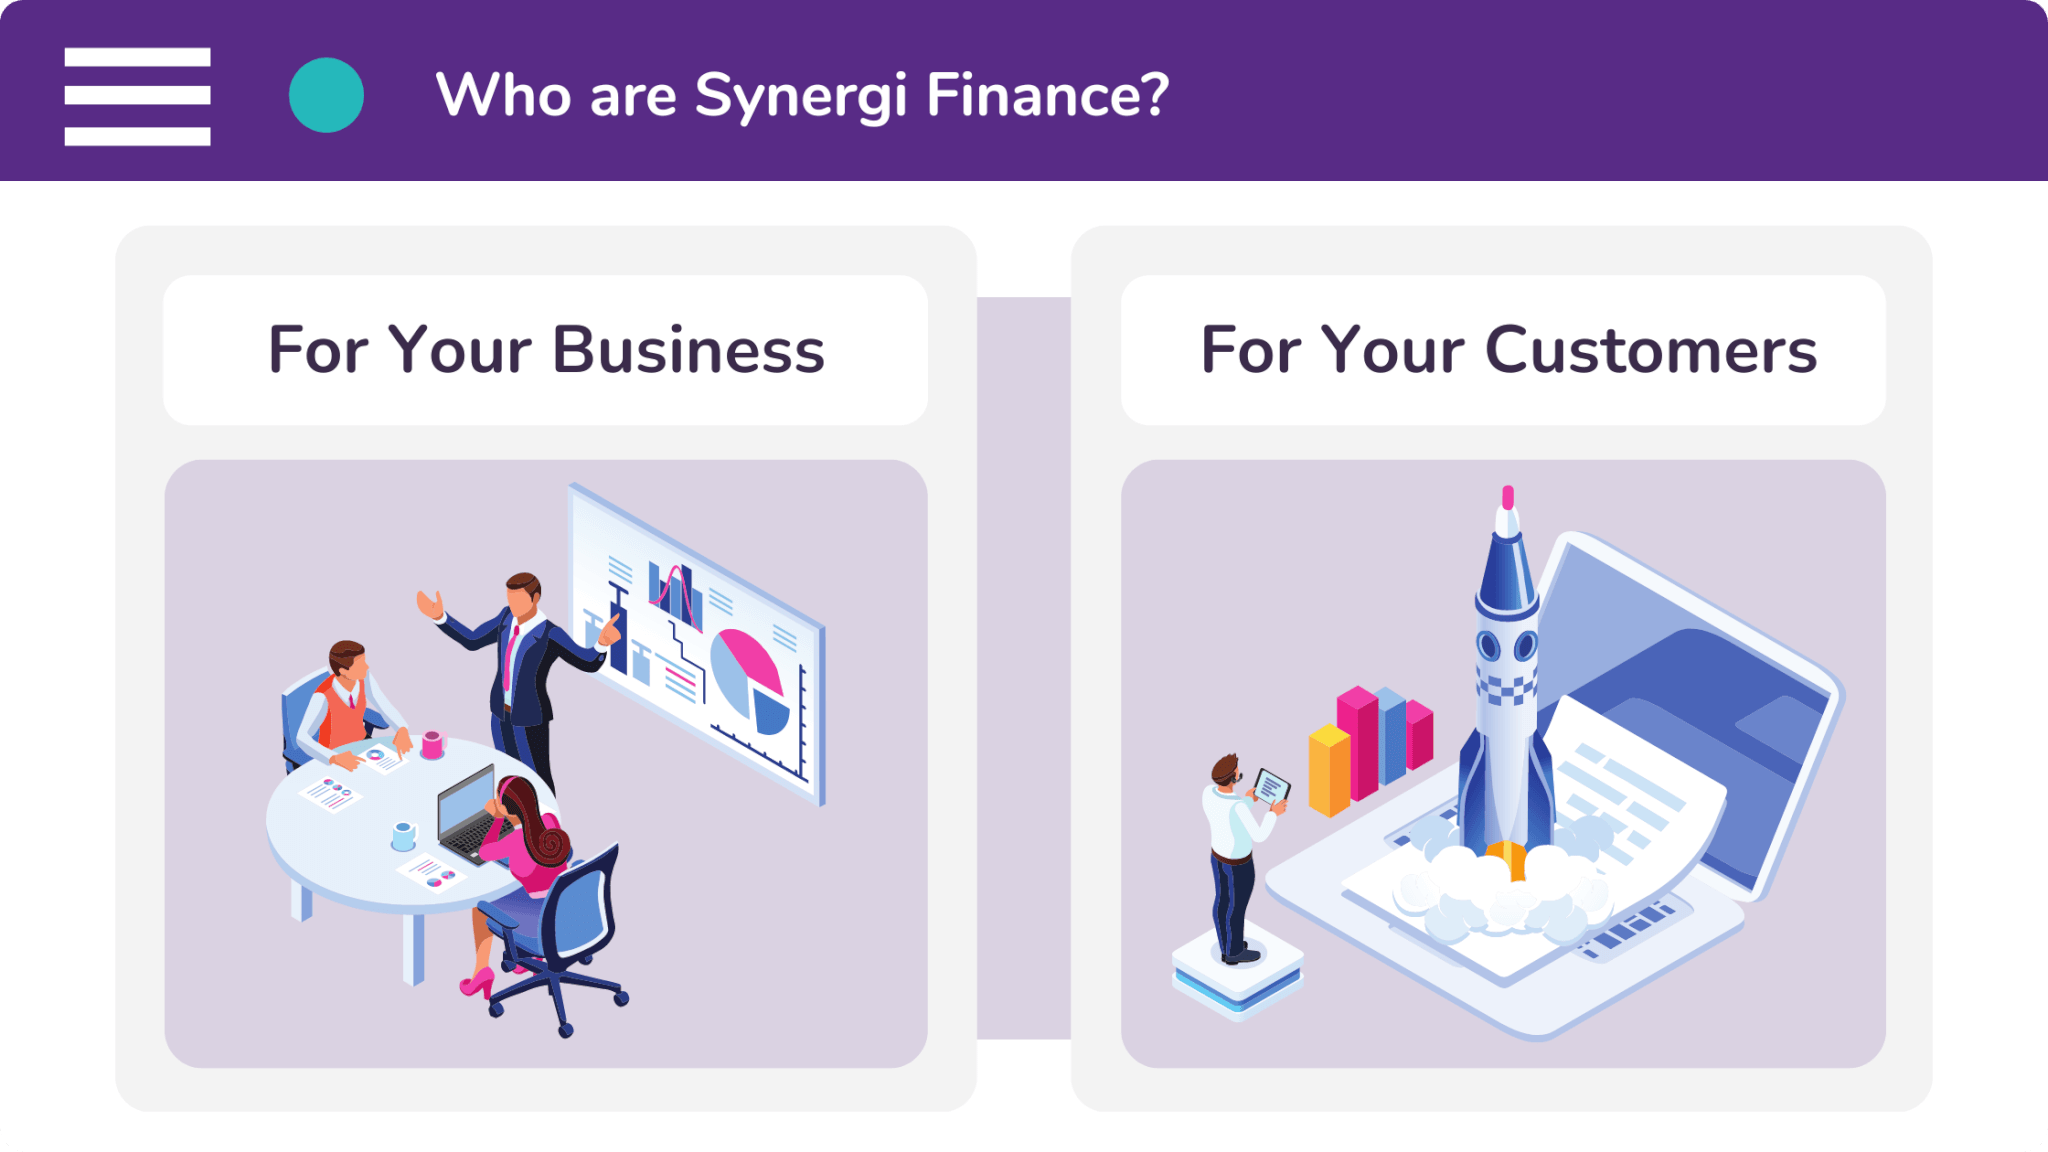 Synergi Finance are a commercial finance brokerage which can arrange funding for both you and your B2B customers.